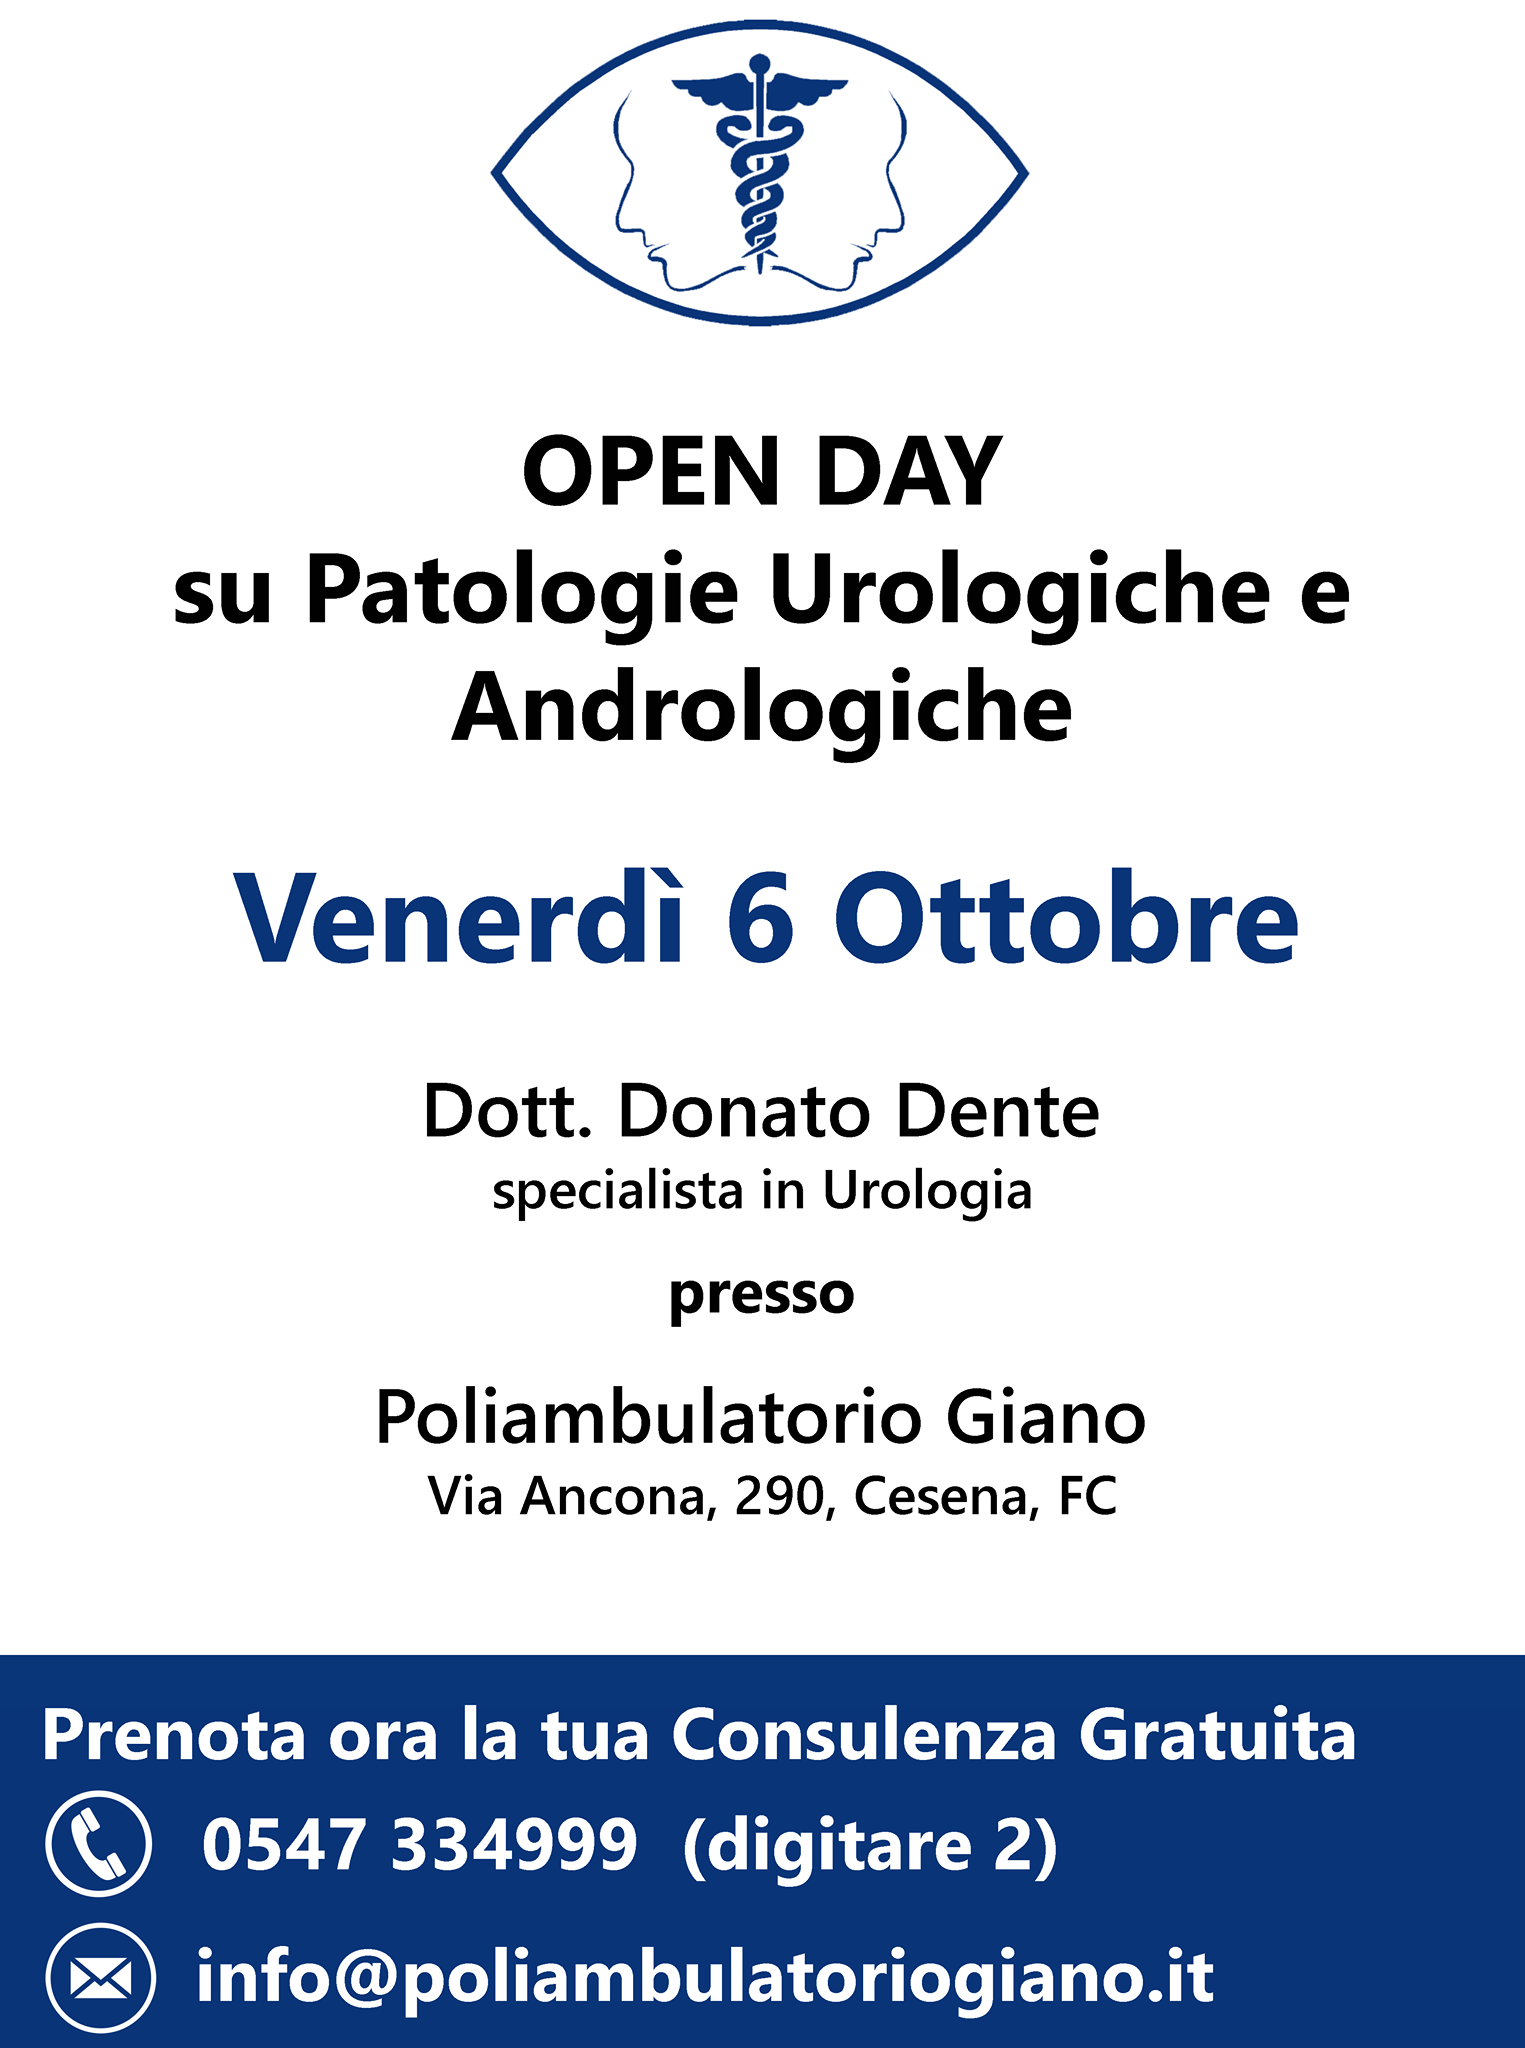 /images/5f84bf7419767b03185f9751-Open day urologia.png